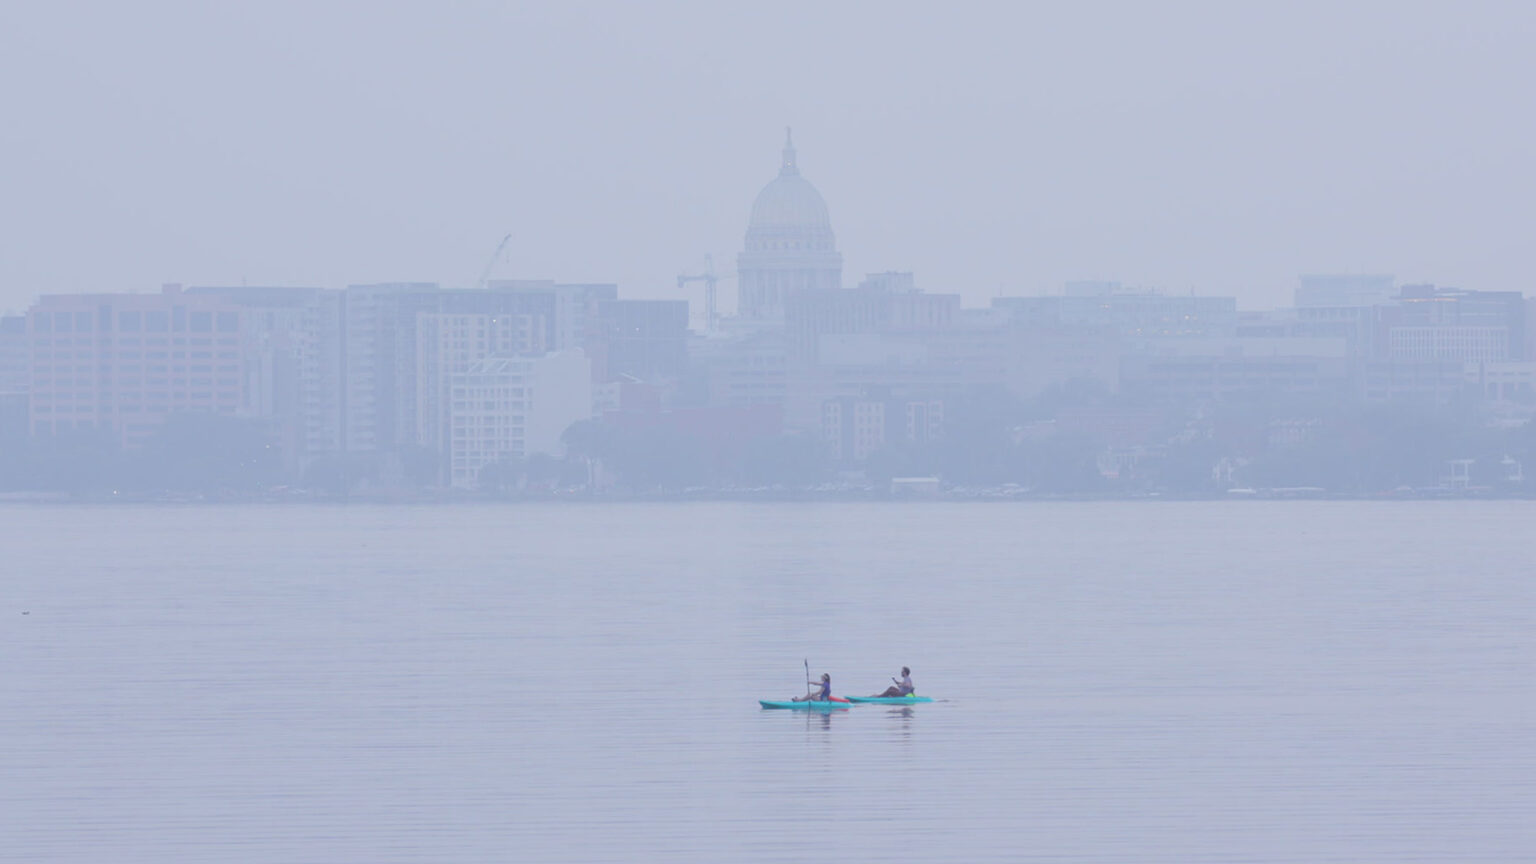 Two kayakers paddle in the calm waters of a lake, with the skyline of a city in the background with the Wisconsin State Capitol dome at center, with a haze from smoke obscuring the clarity of the buildings.